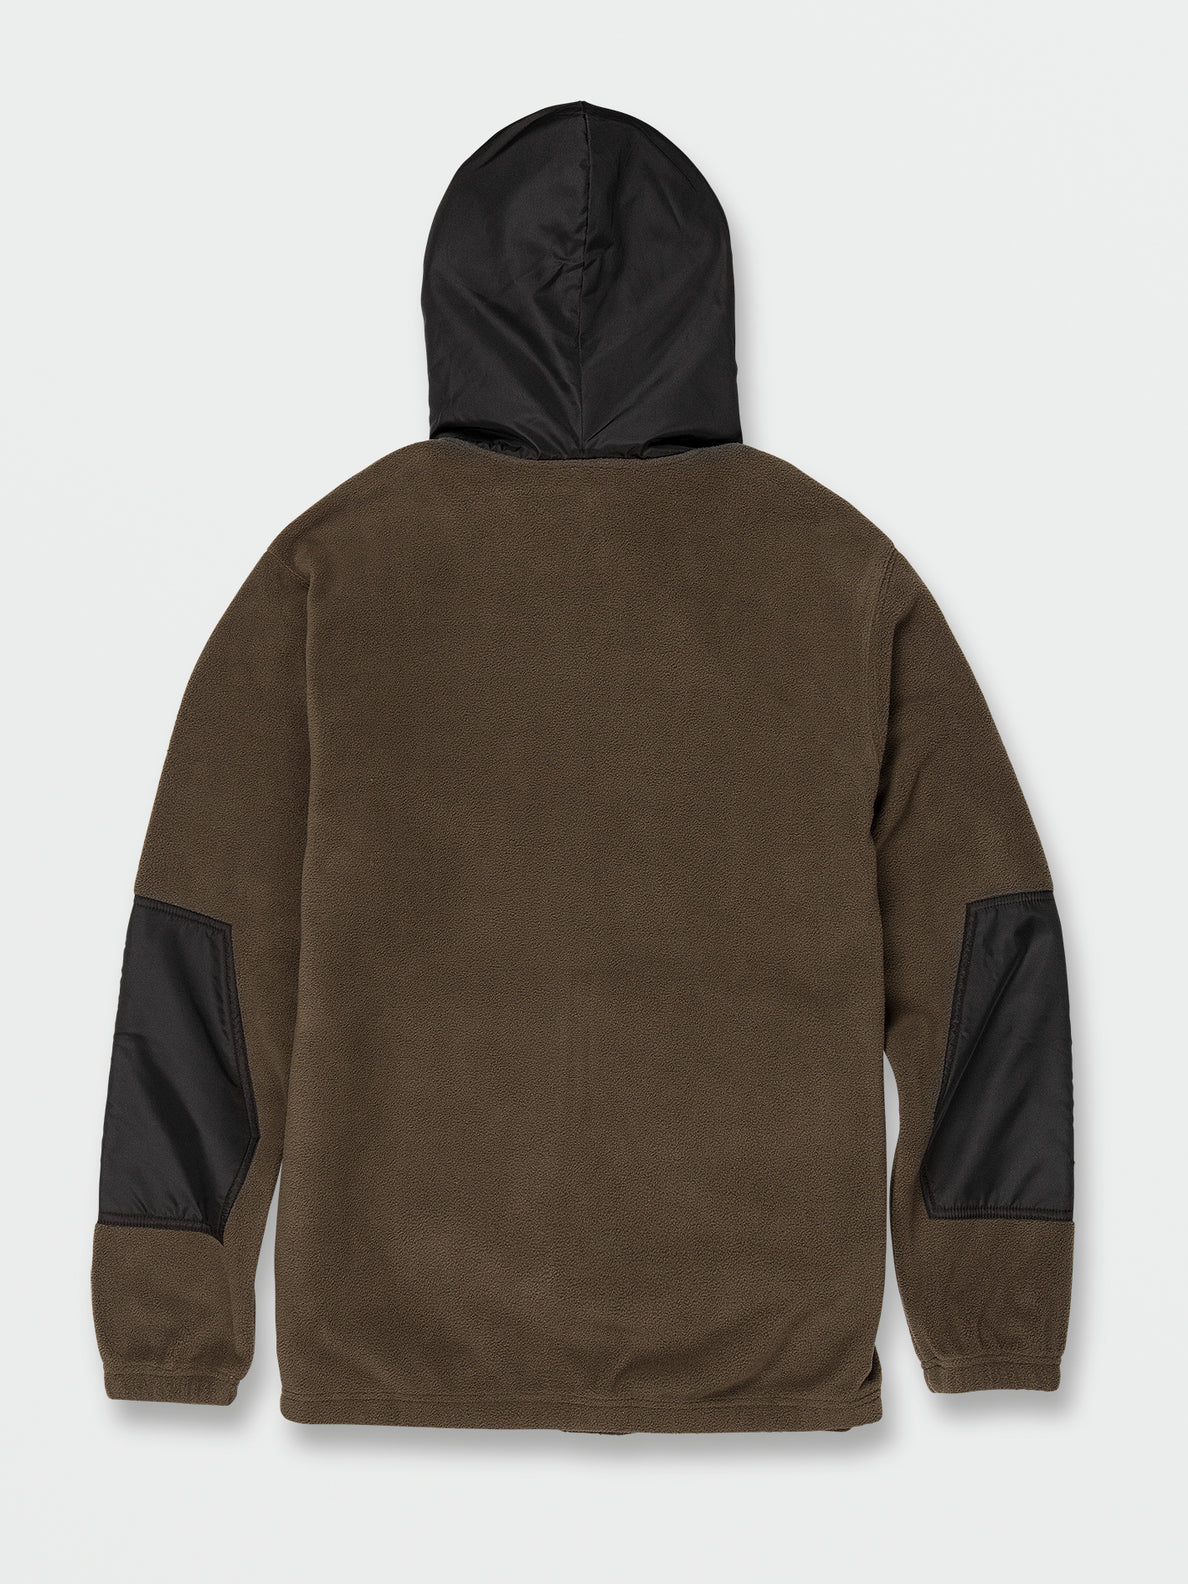 Yzzolater Lined Zip Hoodie - Dark Olive (A5842200_DKO) [1]